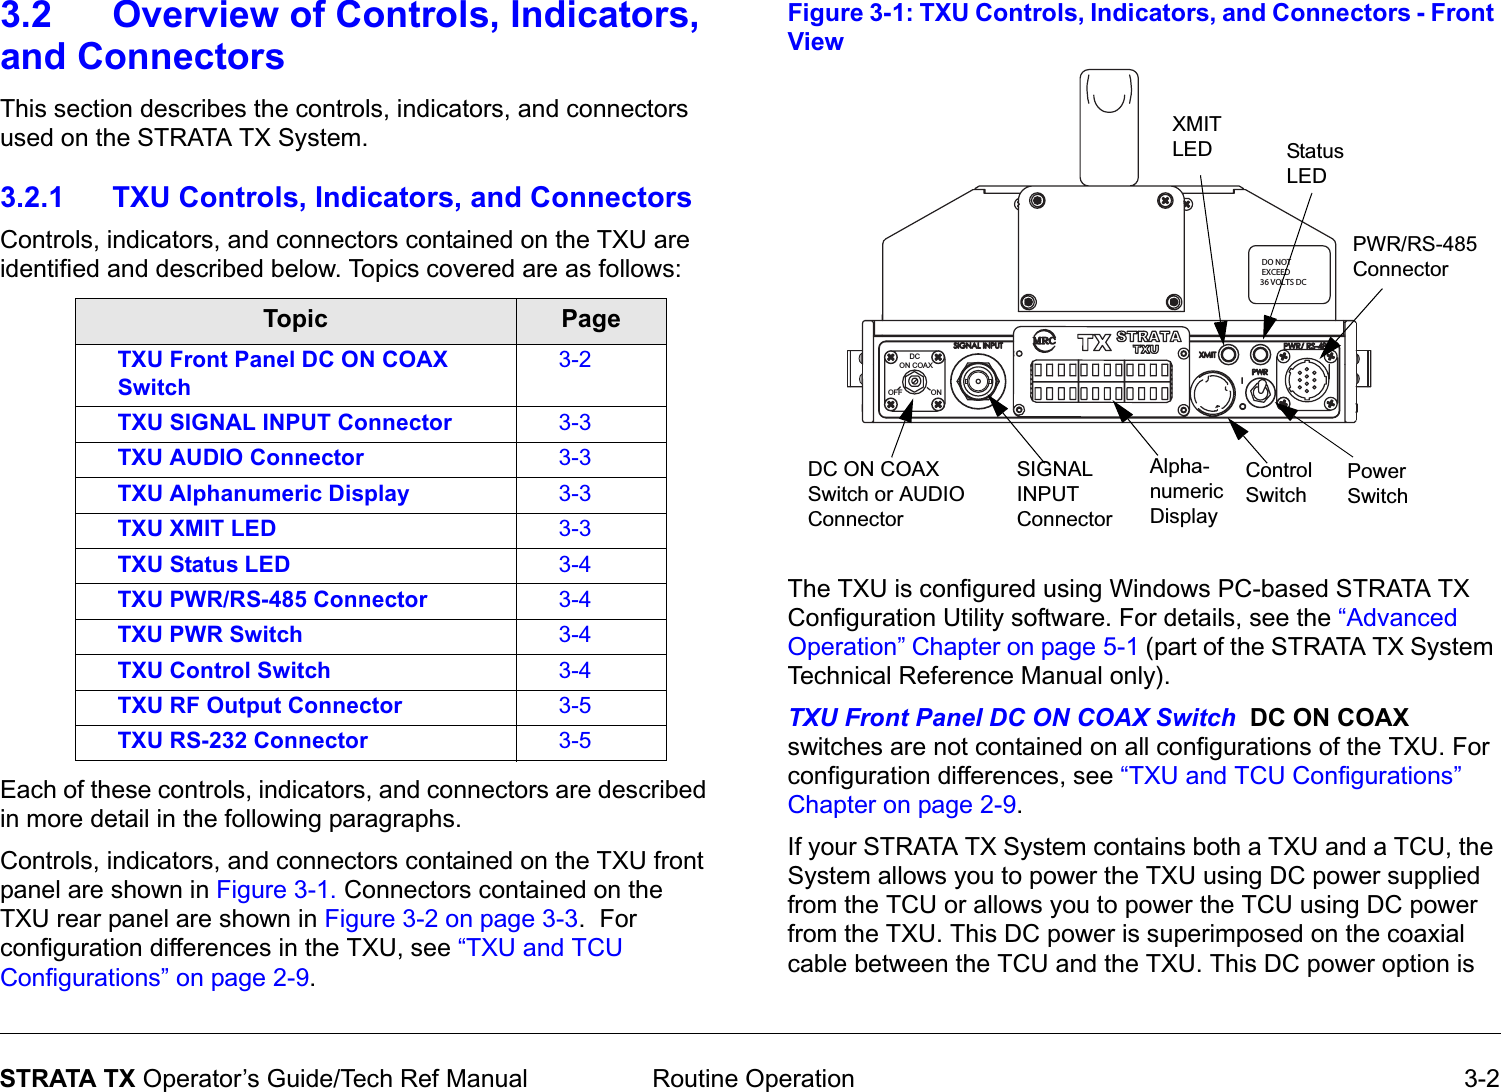  Routine Operation 3-2STRATA TX Operator’s Guide/Tech Ref Manual3.2 Overview of Controls, Indicators, and Connectors This section describes the controls, indicators, and connectors used on the STRATA TX System. 3.2.1 TXU Controls, Indicators, and ConnectorsControls, indicators, and connectors contained on the TXU are identified and described below. Topics covered are as follows:  Each of these controls, indicators, and connectors are described in more detail in the following paragraphs. Controls, indicators, and connectors contained on the TXU front panel are shown in Figure 3-1. Connectors contained on the TXU rear panel are shown in Figure 3-2 on page 3-3.  For configuration differences in the TXU, see “TXU and TCU Configurations” on page 2-9.Topic PageTXU Front Panel DC ON COAX Switch3-2TXU SIGNAL INPUT Connector 3-3TXU AUDIO Connector 3-3TXU Alphanumeric Display 3-3TXU XMIT LED 3-3TXU Status LED 3-4TXU PWR/RS-485 Connector 3-4TXU PWR Switch 3-4TXU Control Switch 3-4TXU RF Output Connector 3-5TXU RS-232 Connector 3-5Figure 3-1: TXU Controls, Indicators, and Connectors - Front ViewThe TXU is configured using Windows PC-based STRATA TX Configuration Utility software. For details, see the “Advanced Operation” Chapter on page 5-1 (part of the STRATA TX System Technical Reference Manual only). TXU Front Panel DC ON COAX Switch  DC ON COAX switches are not contained on all configurations of the TXU. For configuration differences, see “TXU and TCU Configurations” Chapter on page 2-9.If your STRATA TX System contains both a TXU and a TCU, the System allows you to power the TXU using DC power supplied from the TCU or allows you to power the TCU using DC power from the TXU. This DC power is superimposed on the coaxial cable between the TCU and the TXU. This DC power option is  DO NOT  EXCEED36 VOLTS DC     DC ON COAXOFF              ONSIGNAL INPUT ConnectorAlpha-numeric DisplayStatus LEDDC ON COAX Switch or AUDIO ConnectorControl SwitchPower SwitchPWR/RS-485ConnectorXMIT LED